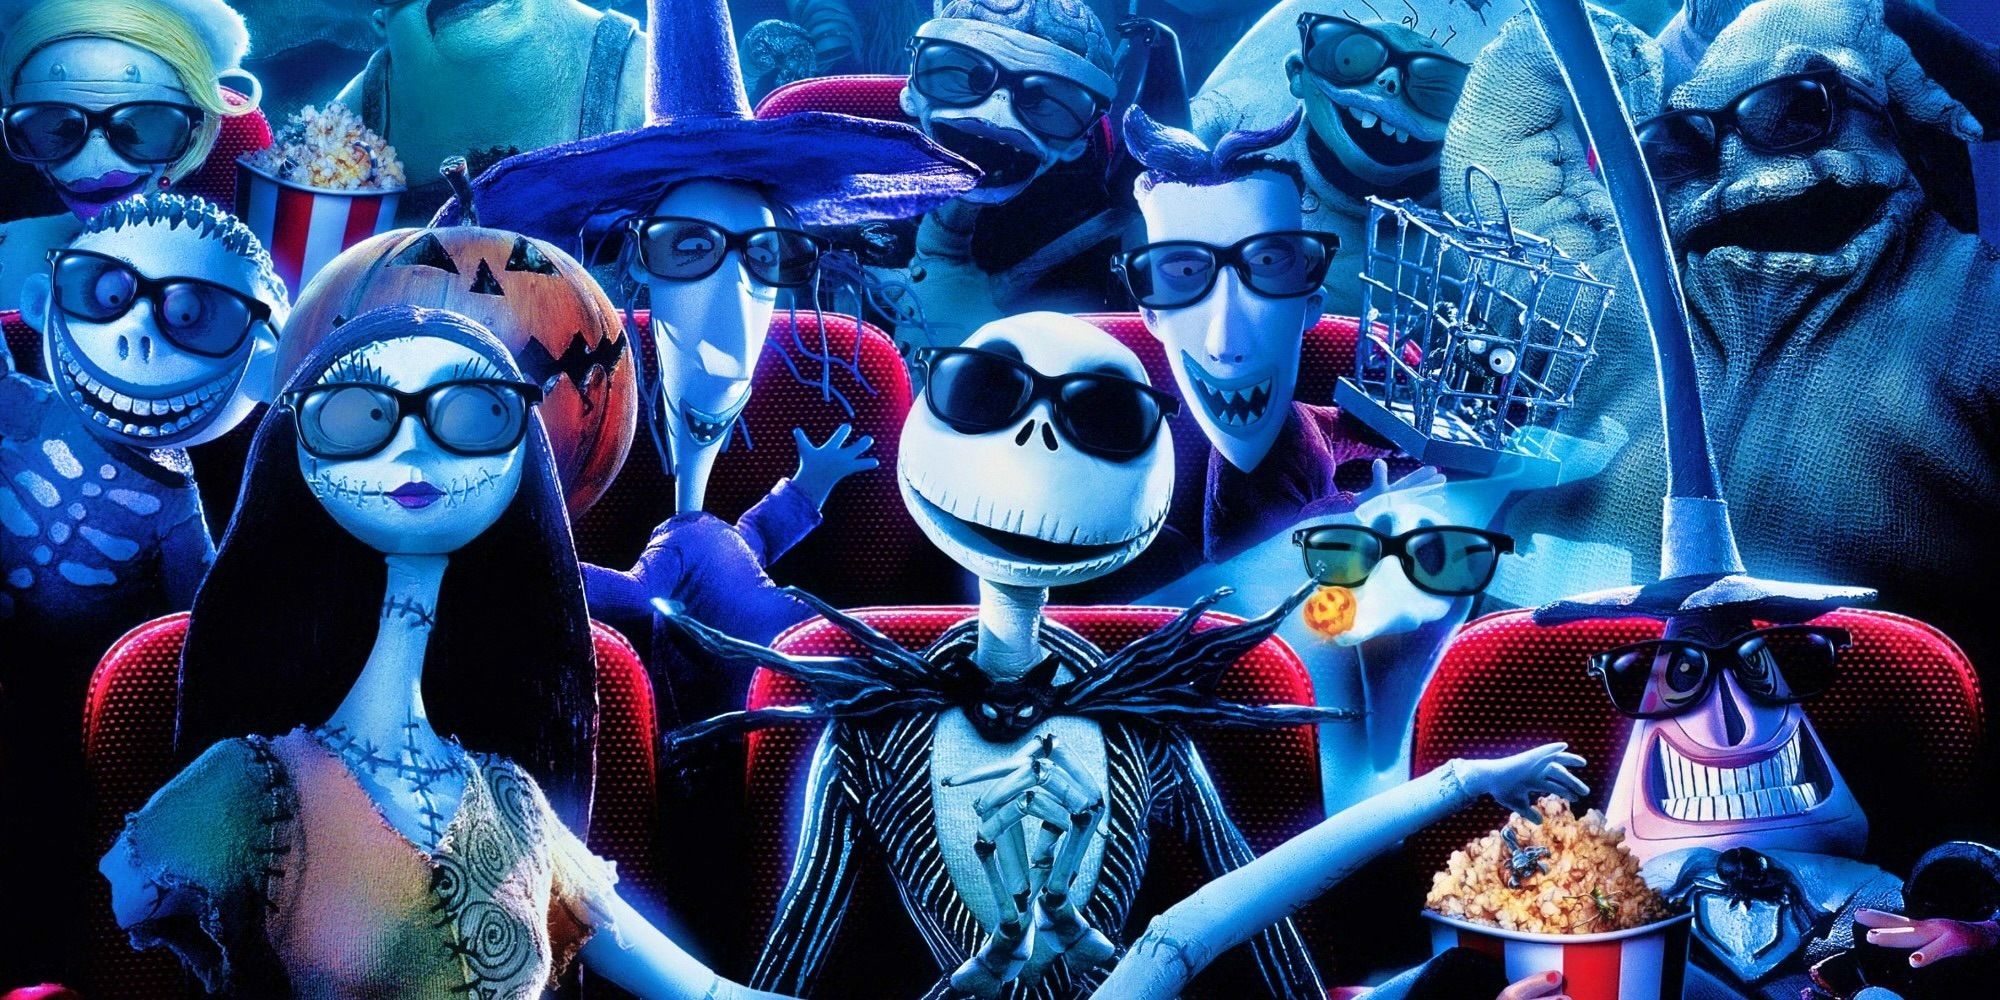 the characters of the nightmare before christmas